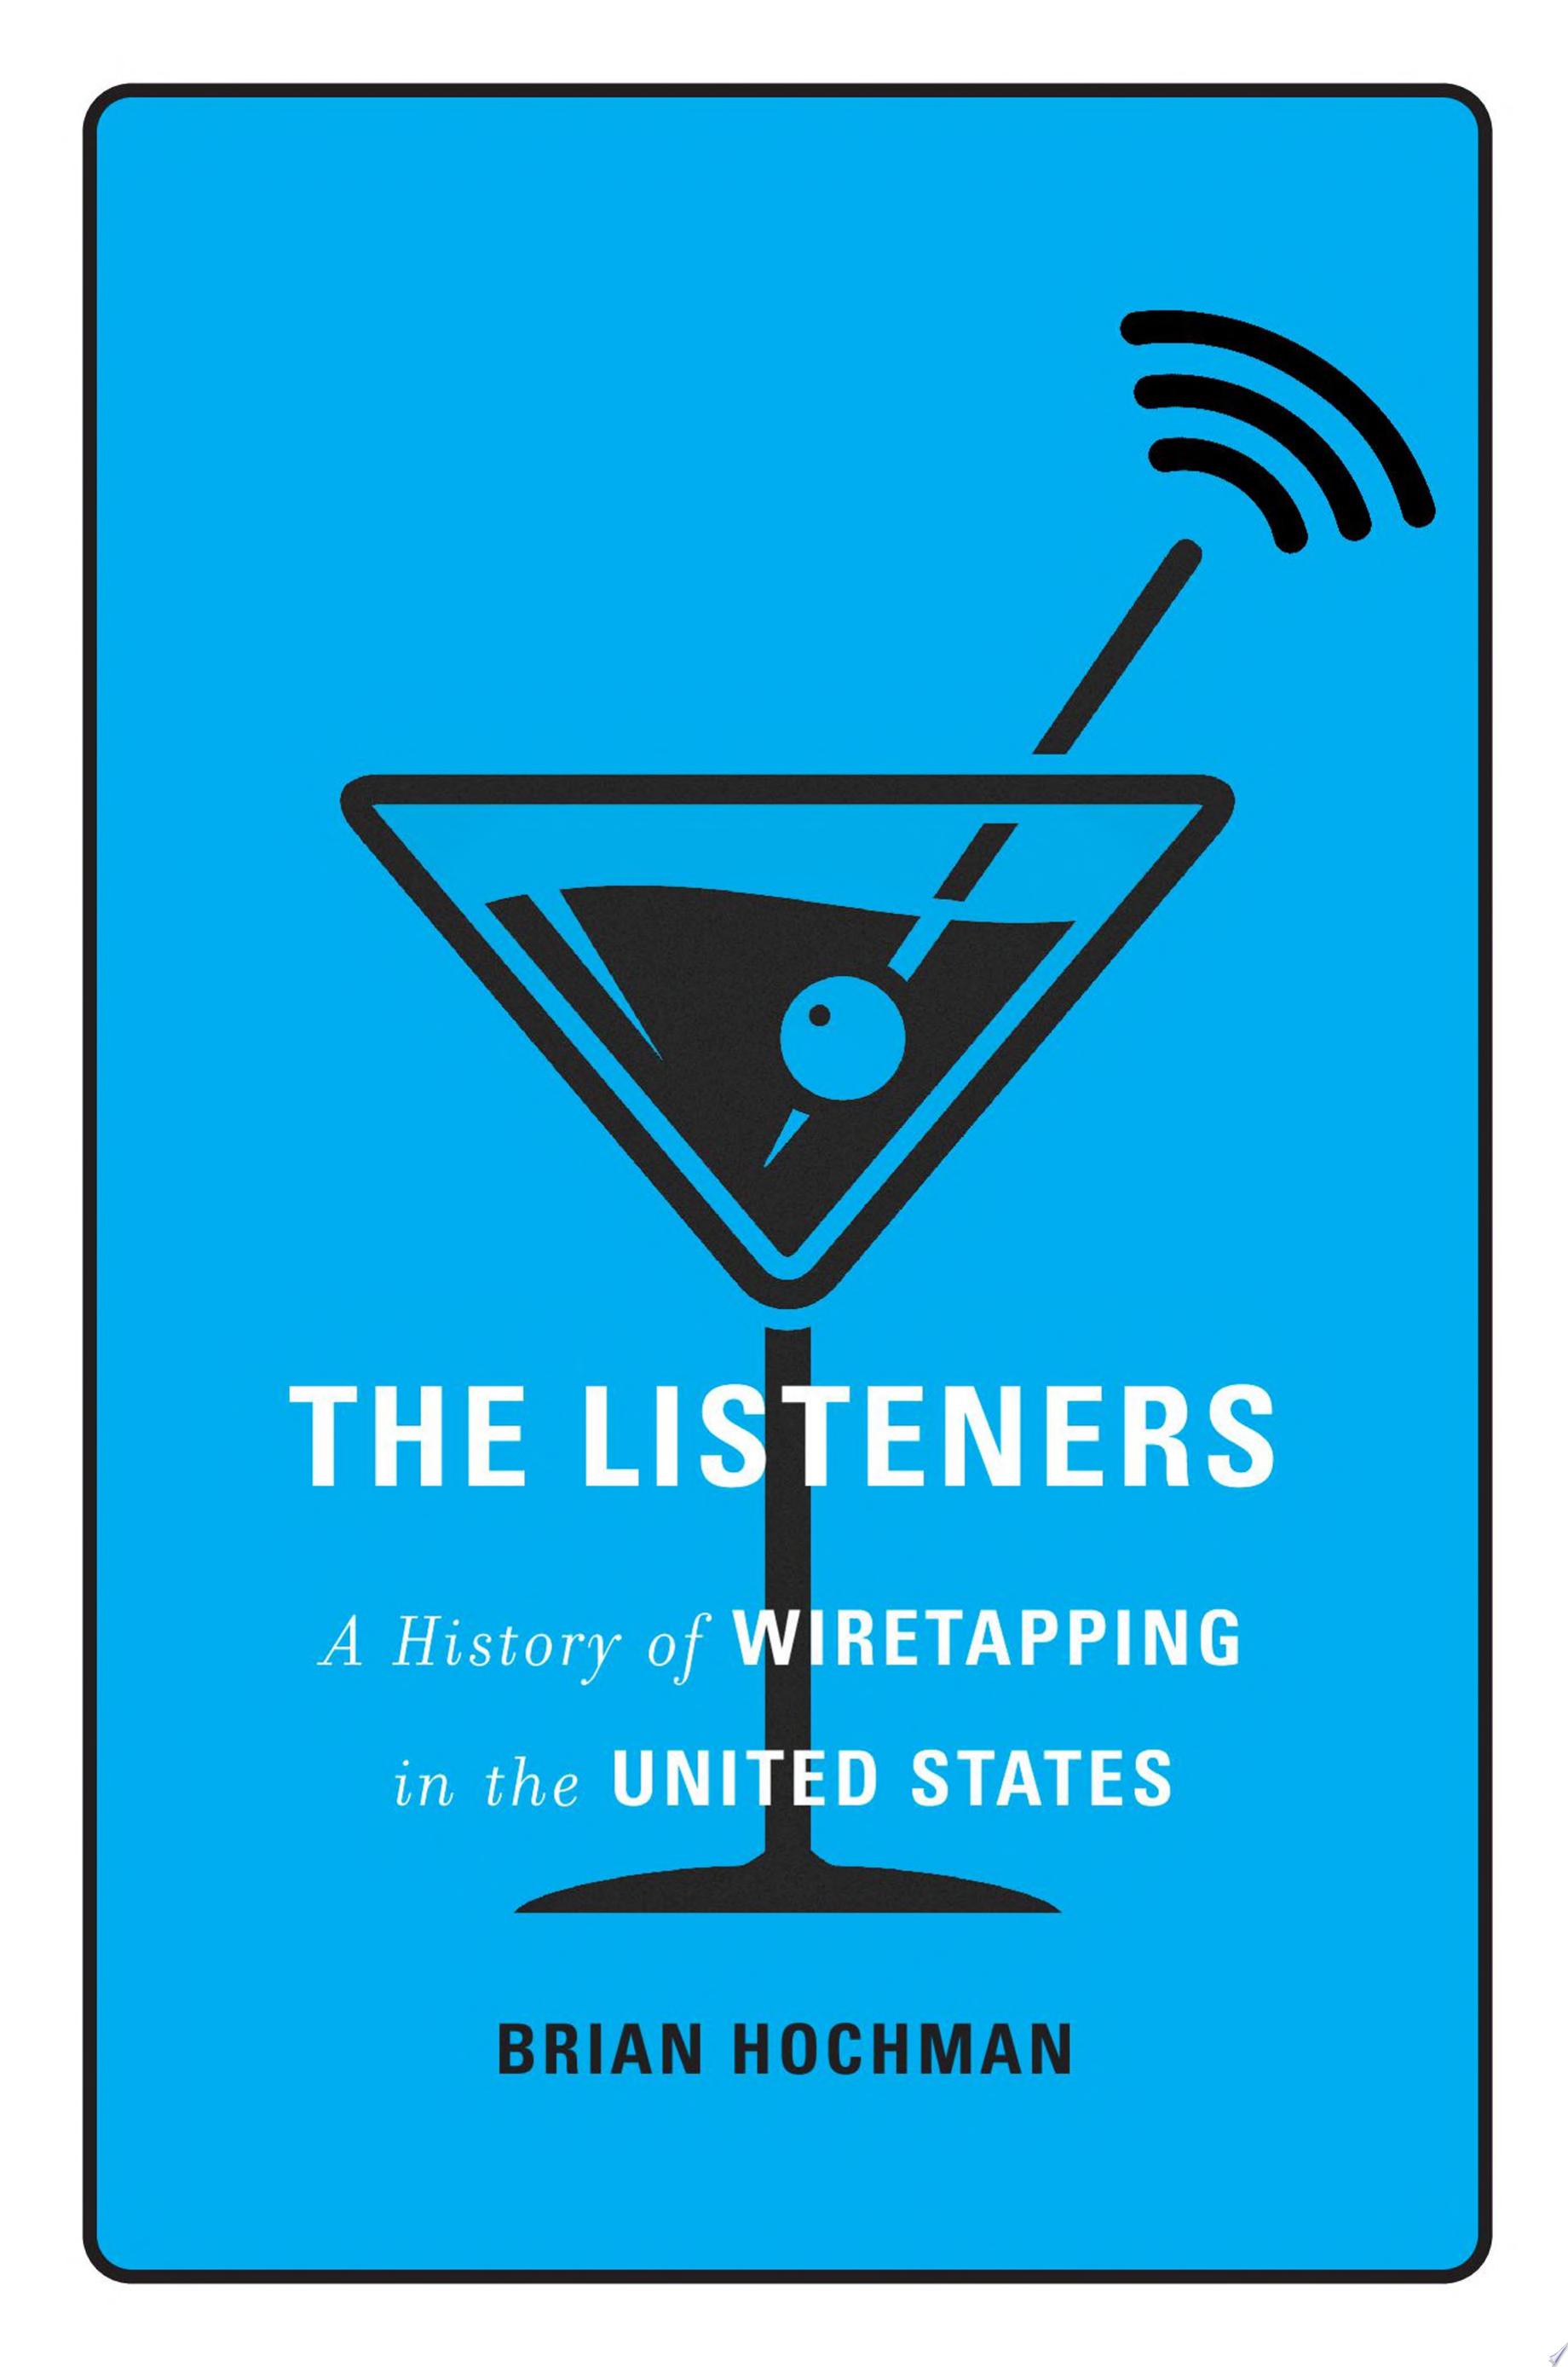 Image for "The Listeners"